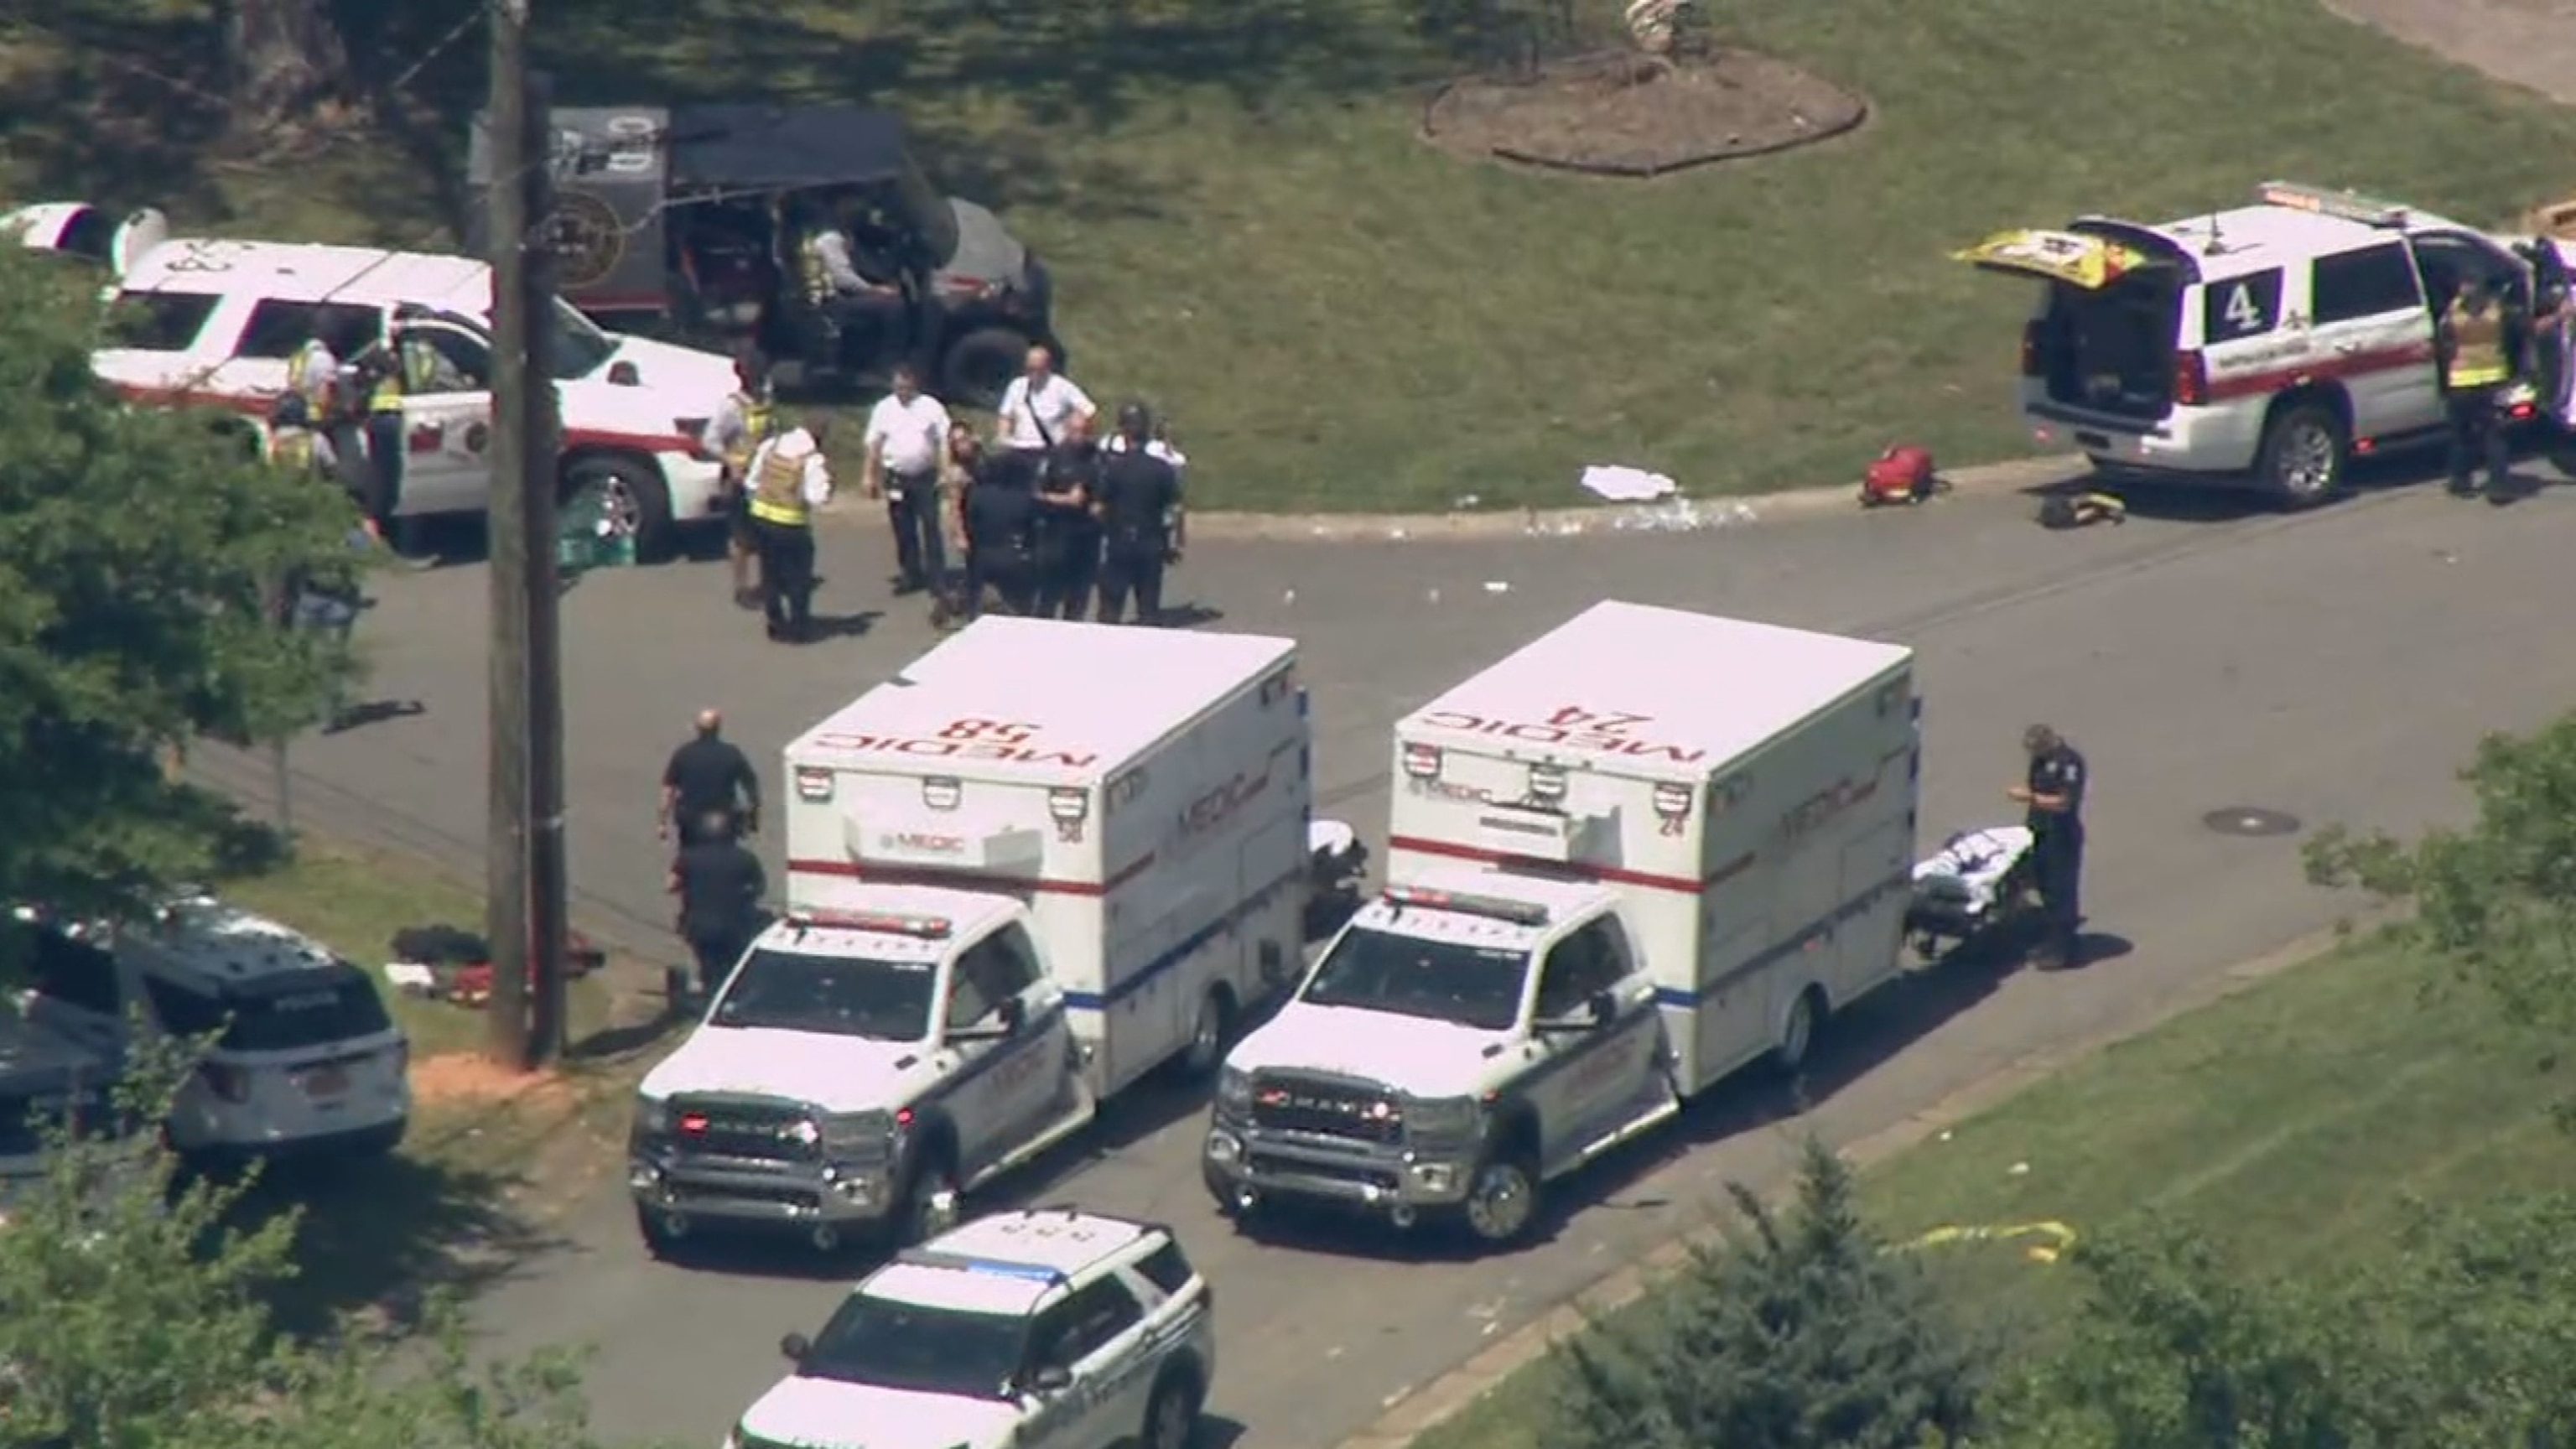 PHOTO: Numerous law enforcement officers struck by gunfire in active situation in the 5000 block of Galway Drive, Charlotte, according to the Charlotte-Mecklenburg Police Department.